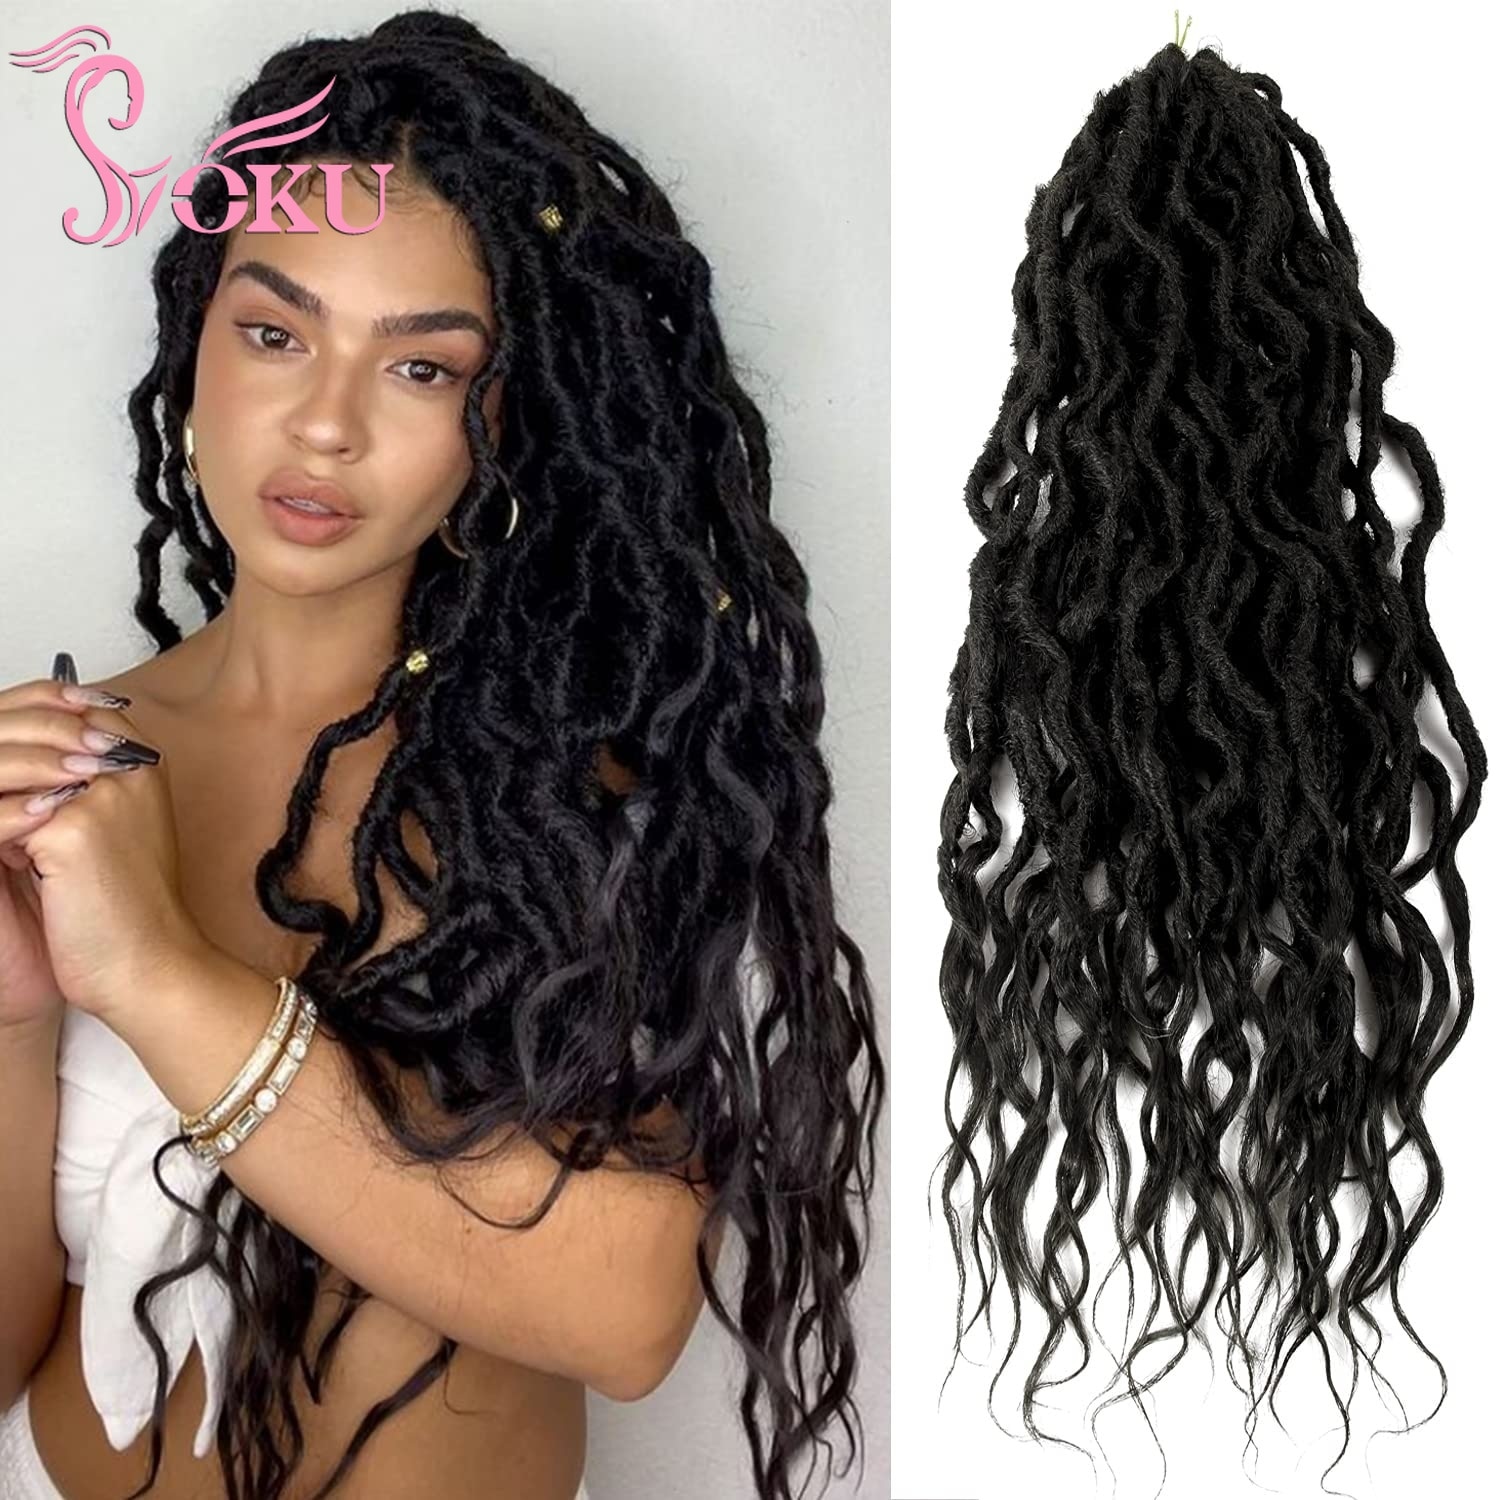 https://haircandybeauty.com/wp-content/uploads/2022/10/New-Goddess-Locs-Wavy-Faux-Locs-Crochet-Hair-With-loose-wavy-ends-Pre-Looped-Synthetic-Braids.jpg